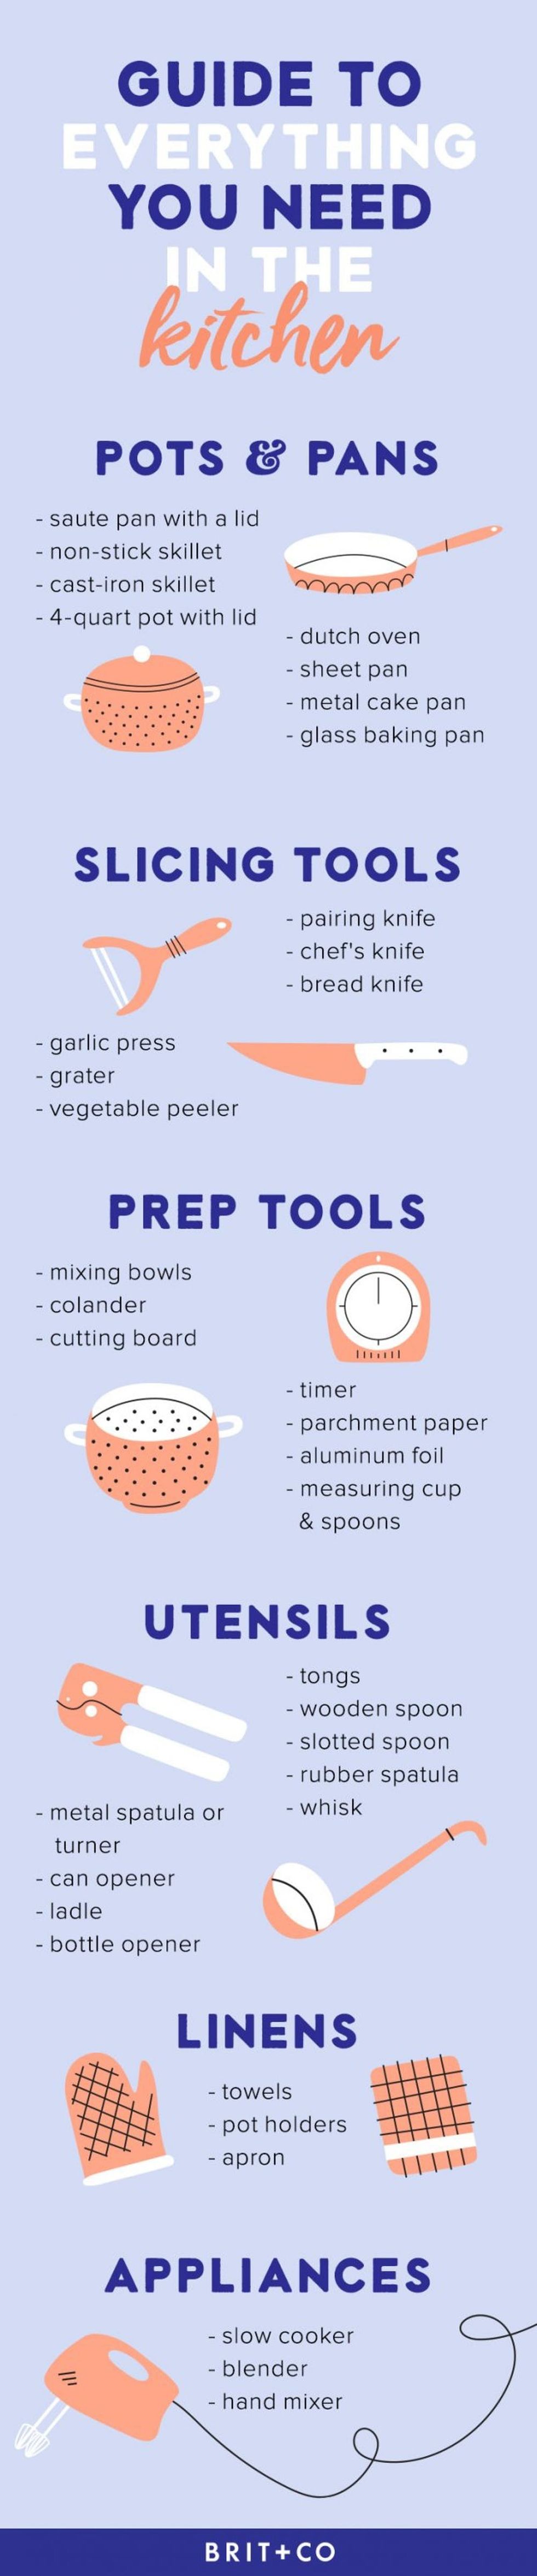 Guide-to-Kitchenware